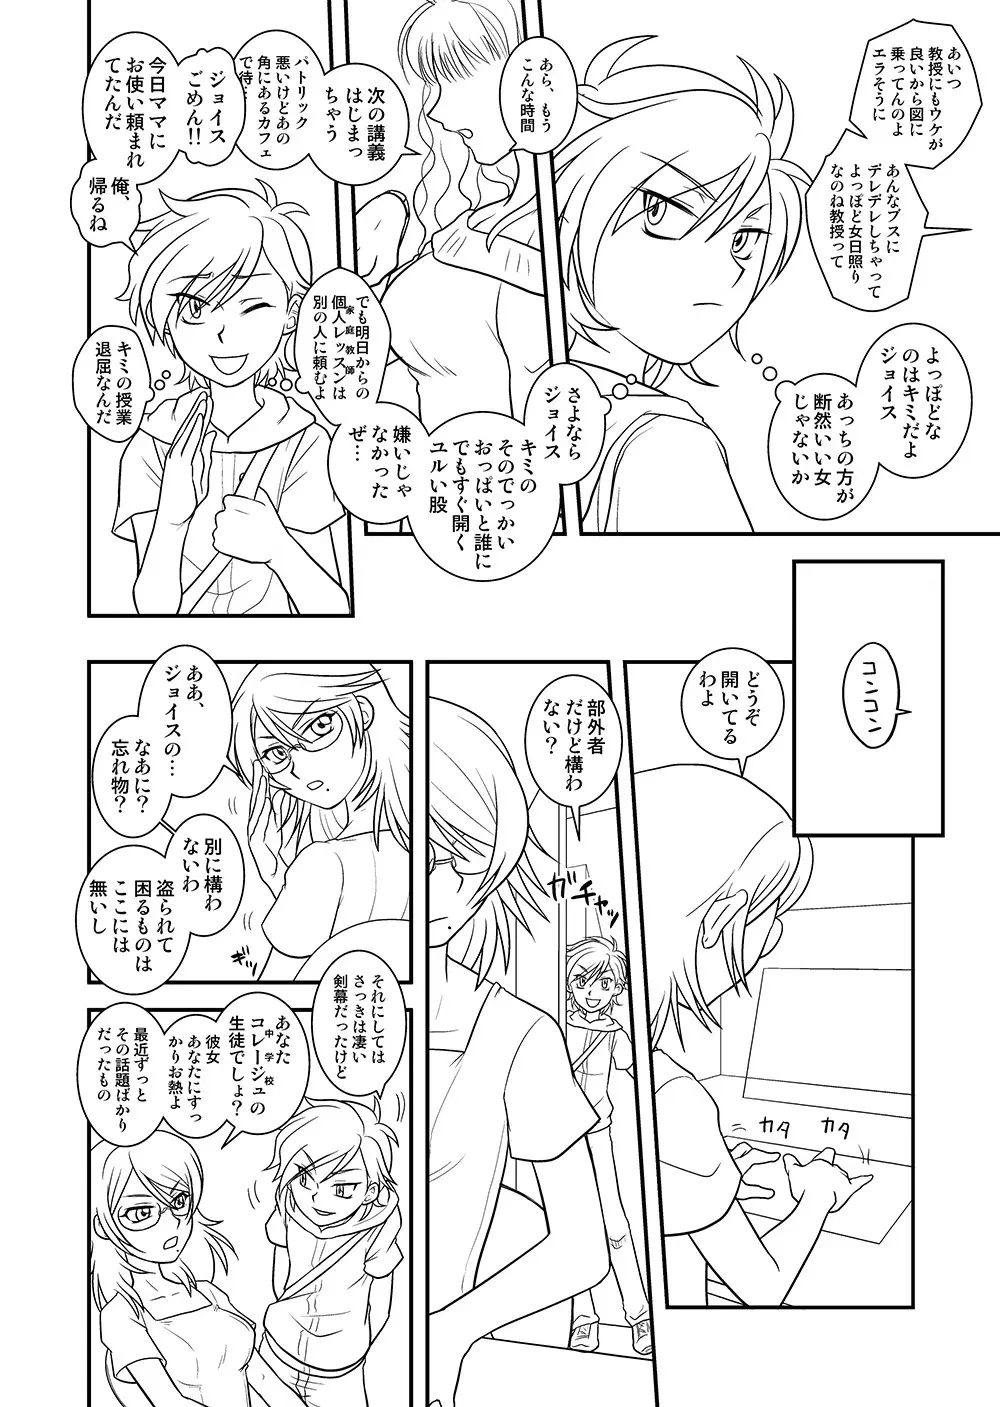 ［WEB再録（？）］たいさとおれ。 - page5